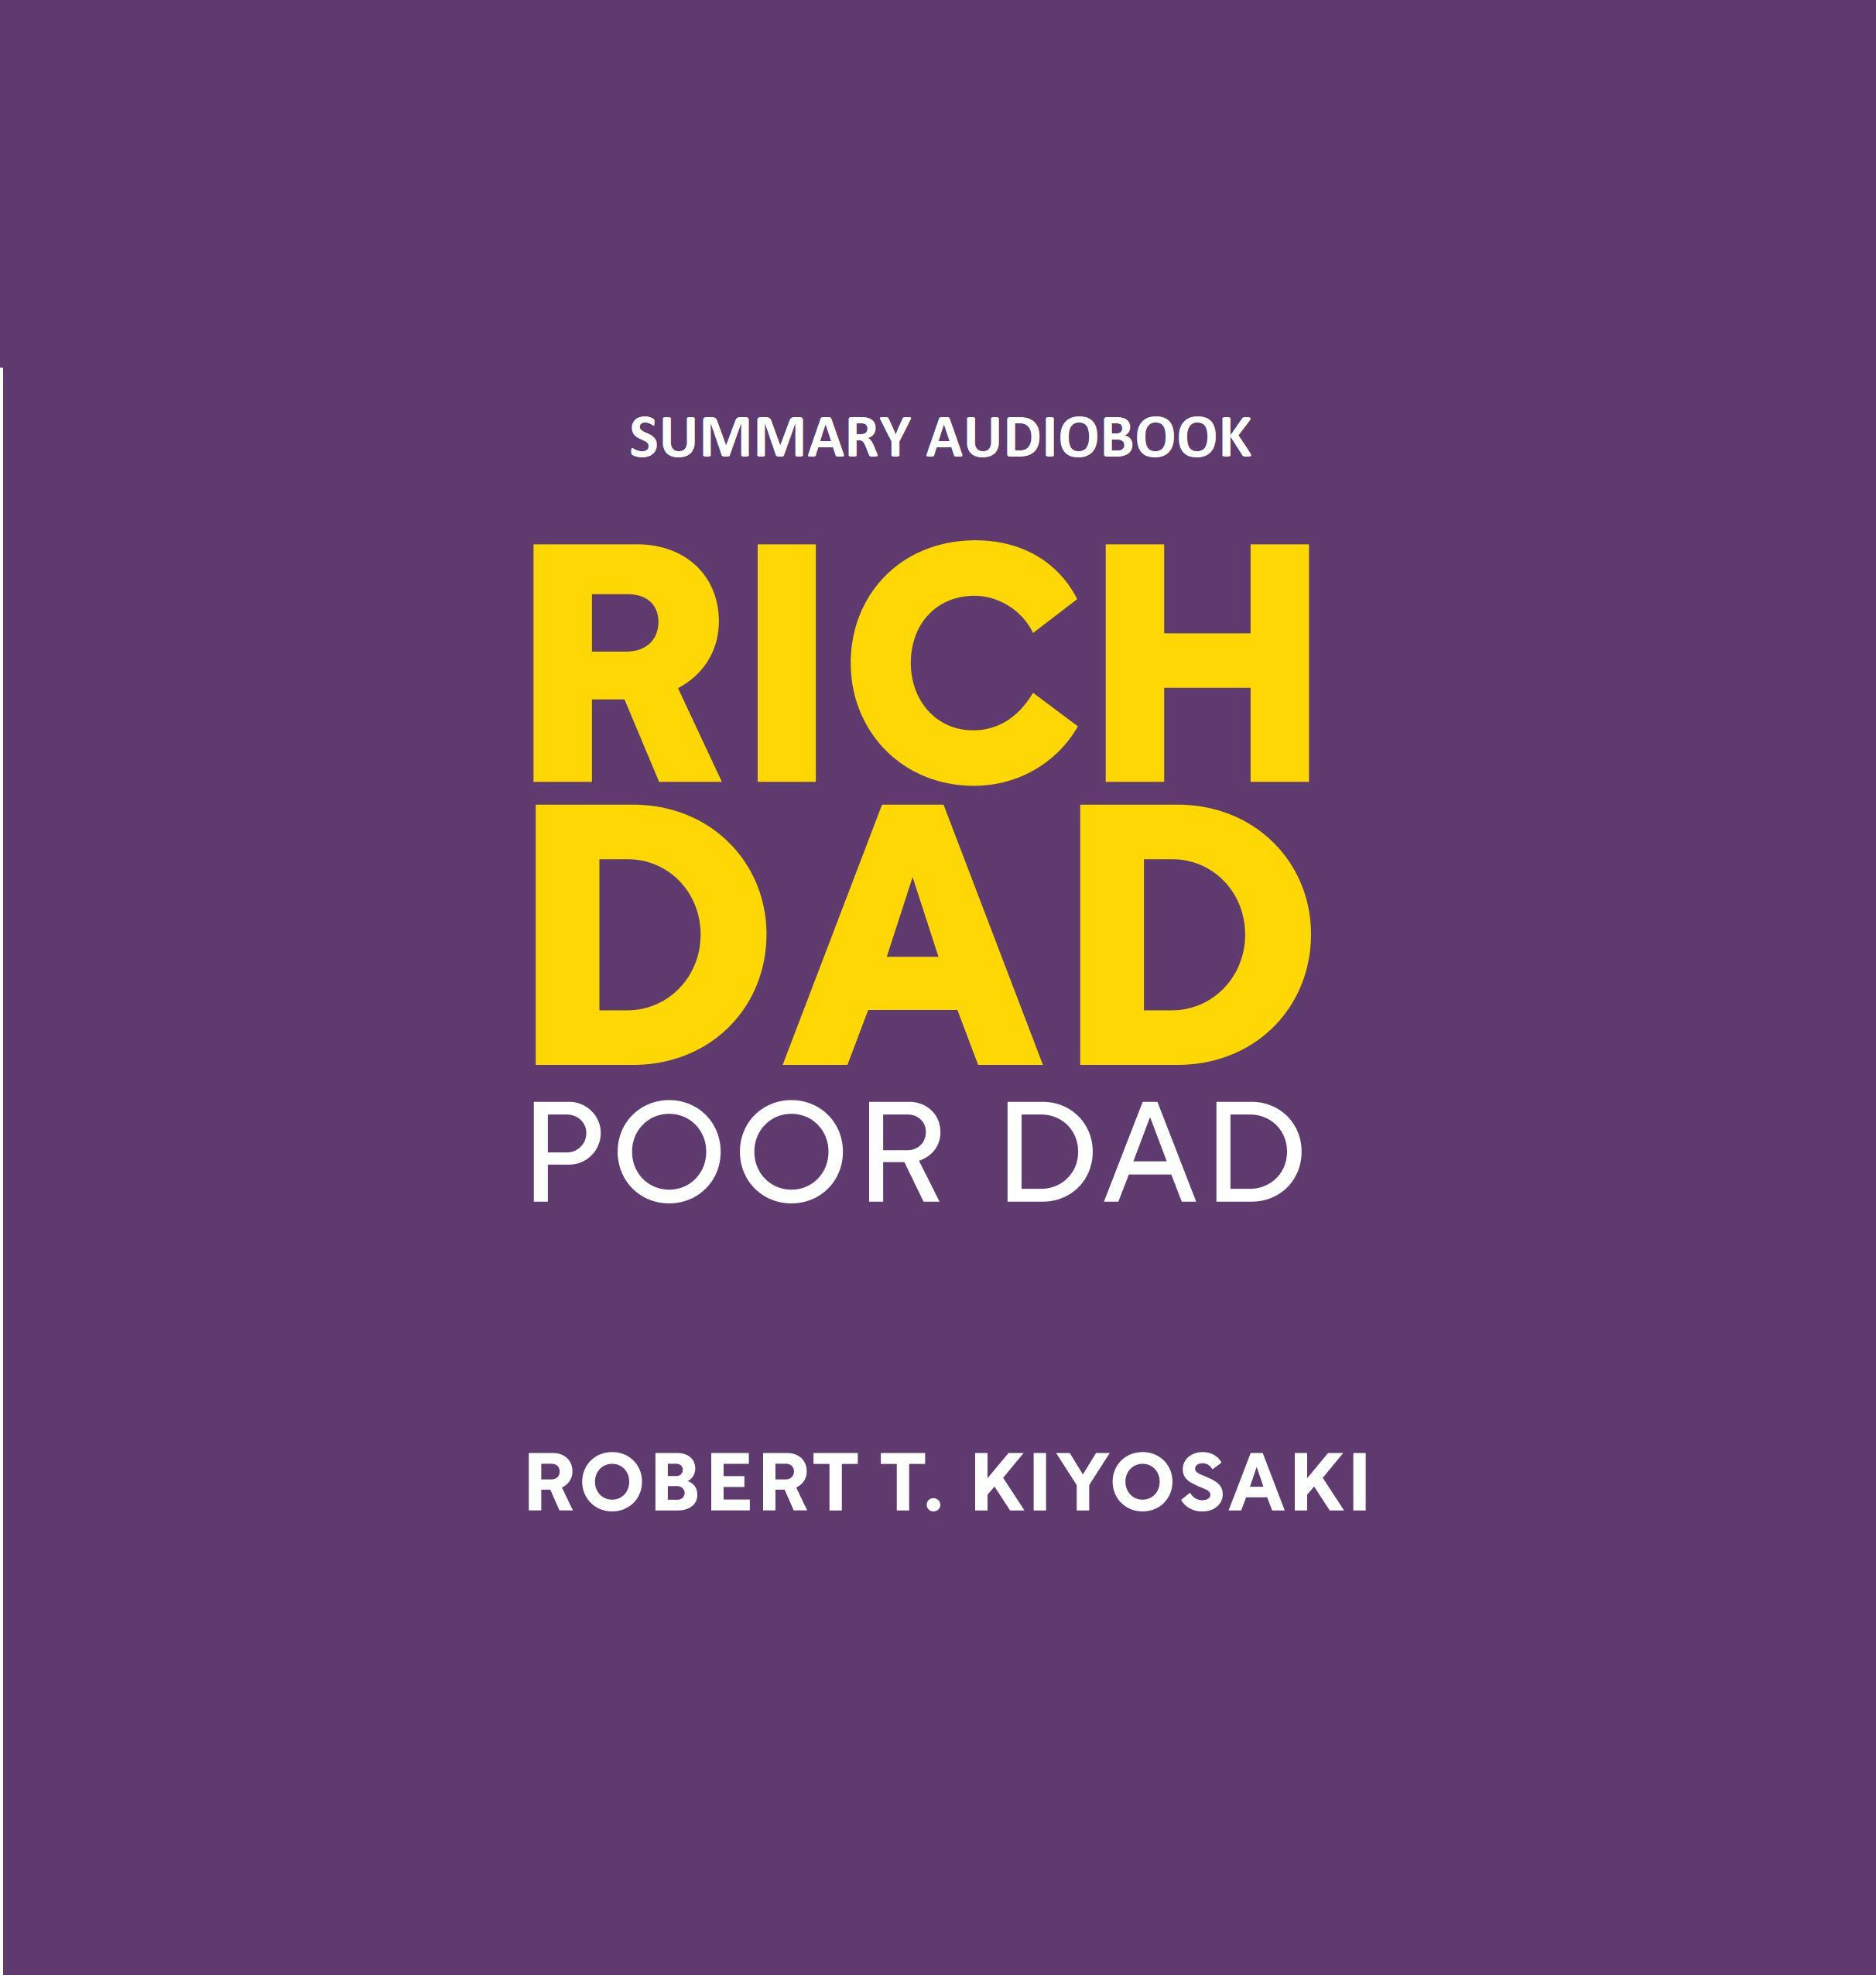 Rich dad poor dad - Summary in English: Separated into chapters summaries - undefined